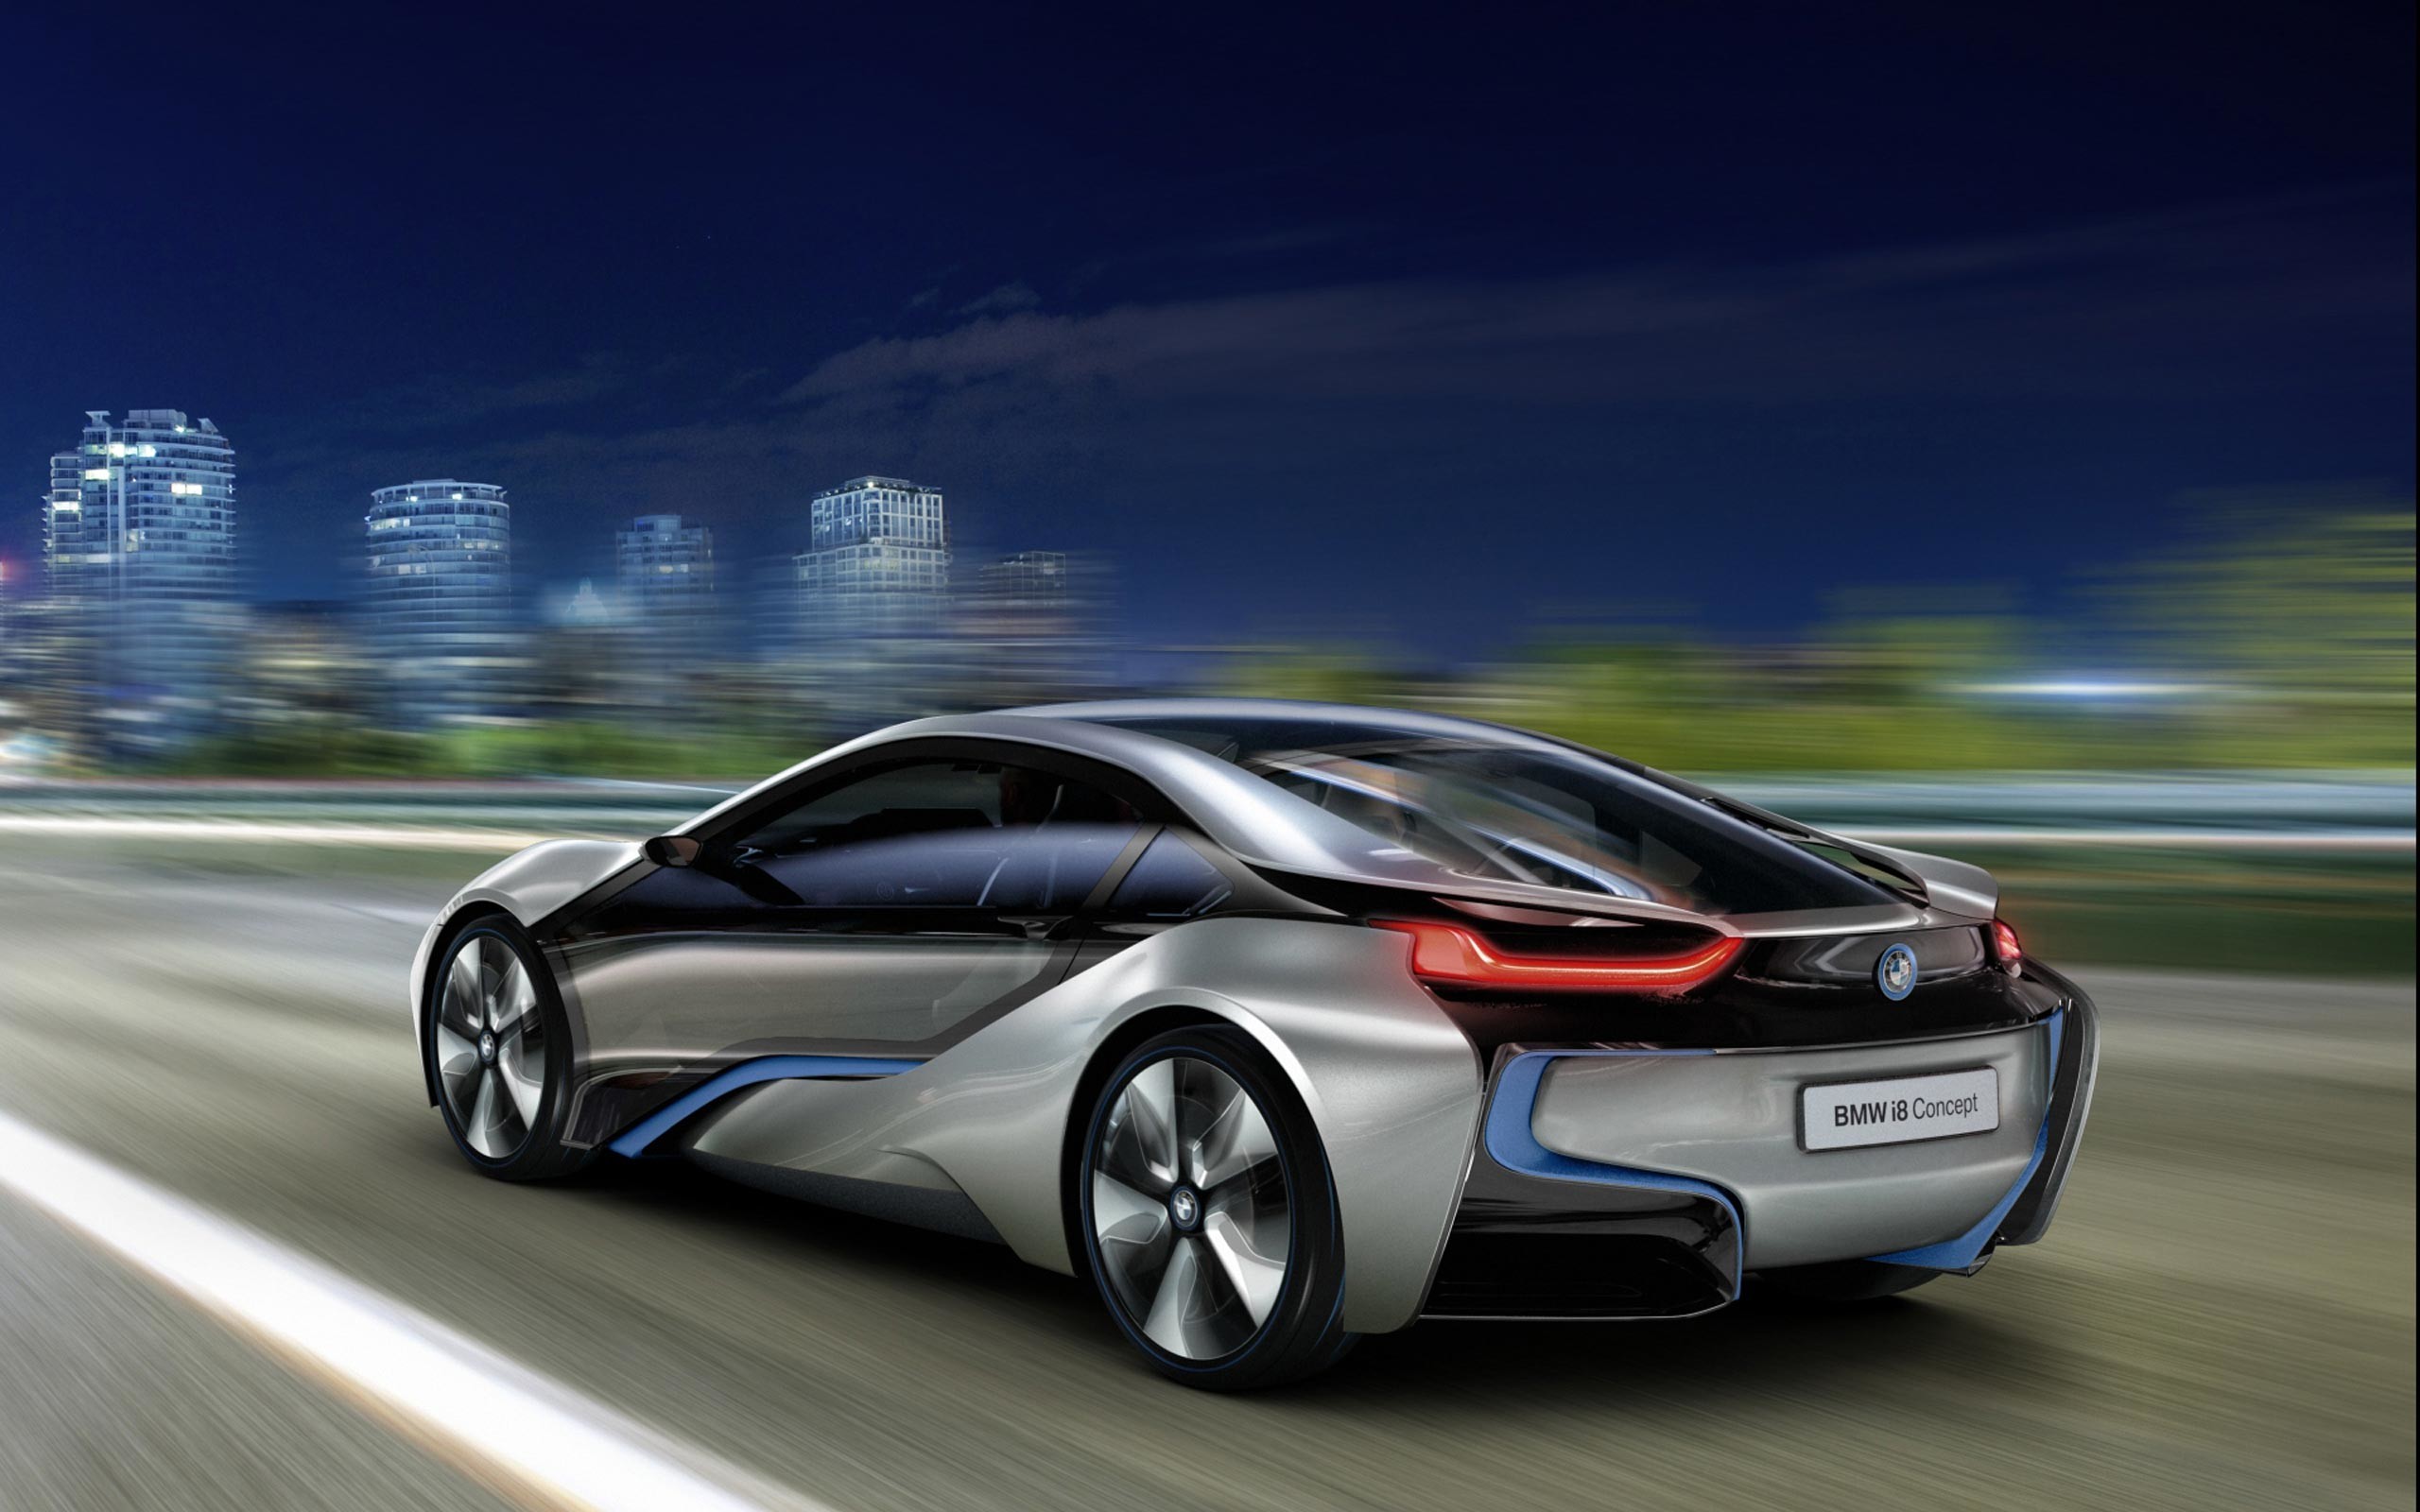 2560x1600 Good BMW i8 Wallpapers.